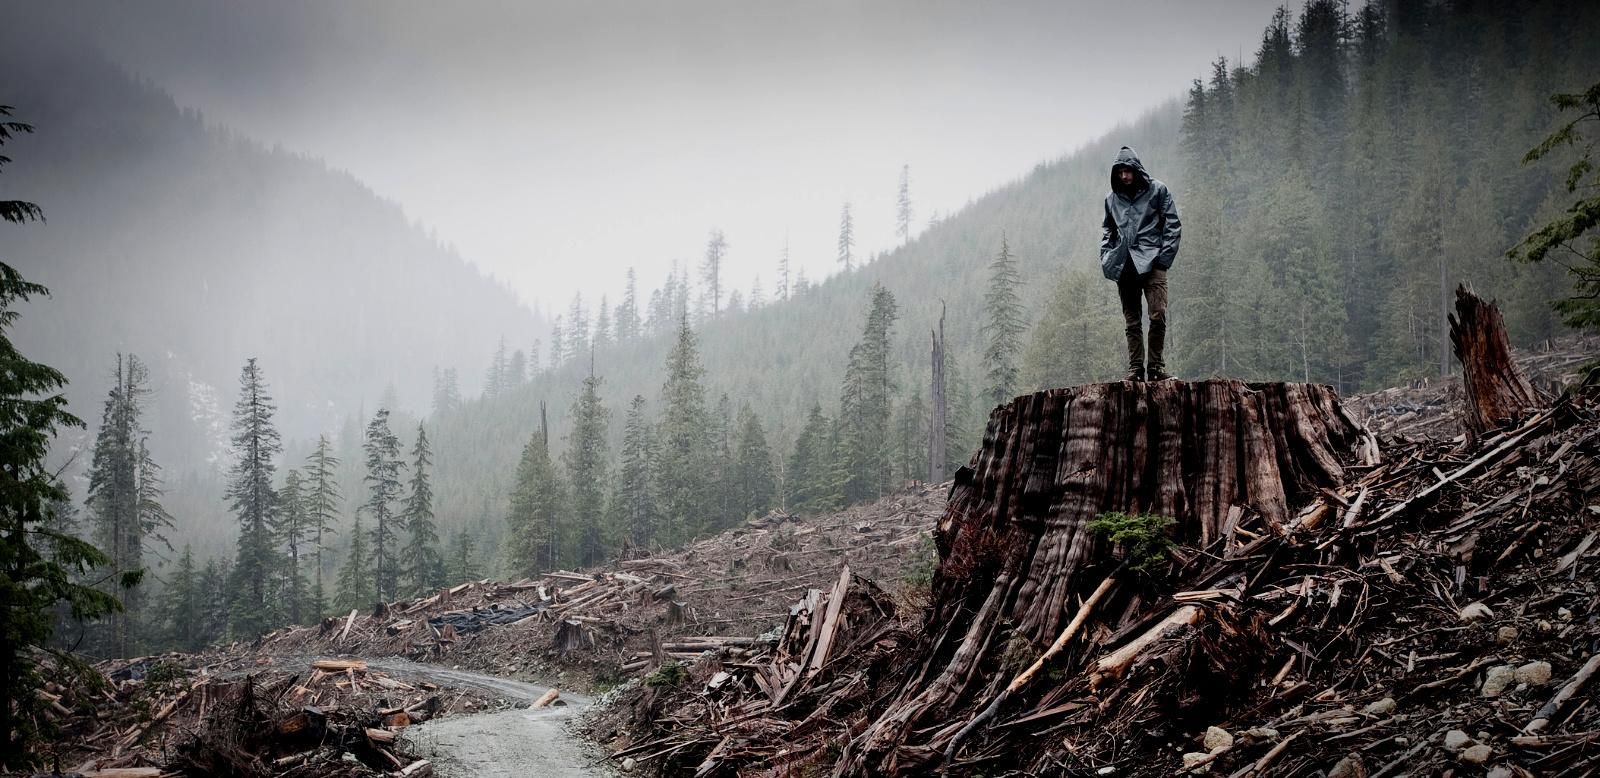 "The towering majestic trees of British Columbia are awe inspiring," Olivia Chow, a former Member of Parliament, said on June 18, 2021. "For the future generations, including my grandchildren, we must protect all of the large old-growth forests immediately." (Photo: (c) TJ Watt / Provided by CanopyPlanet.org)